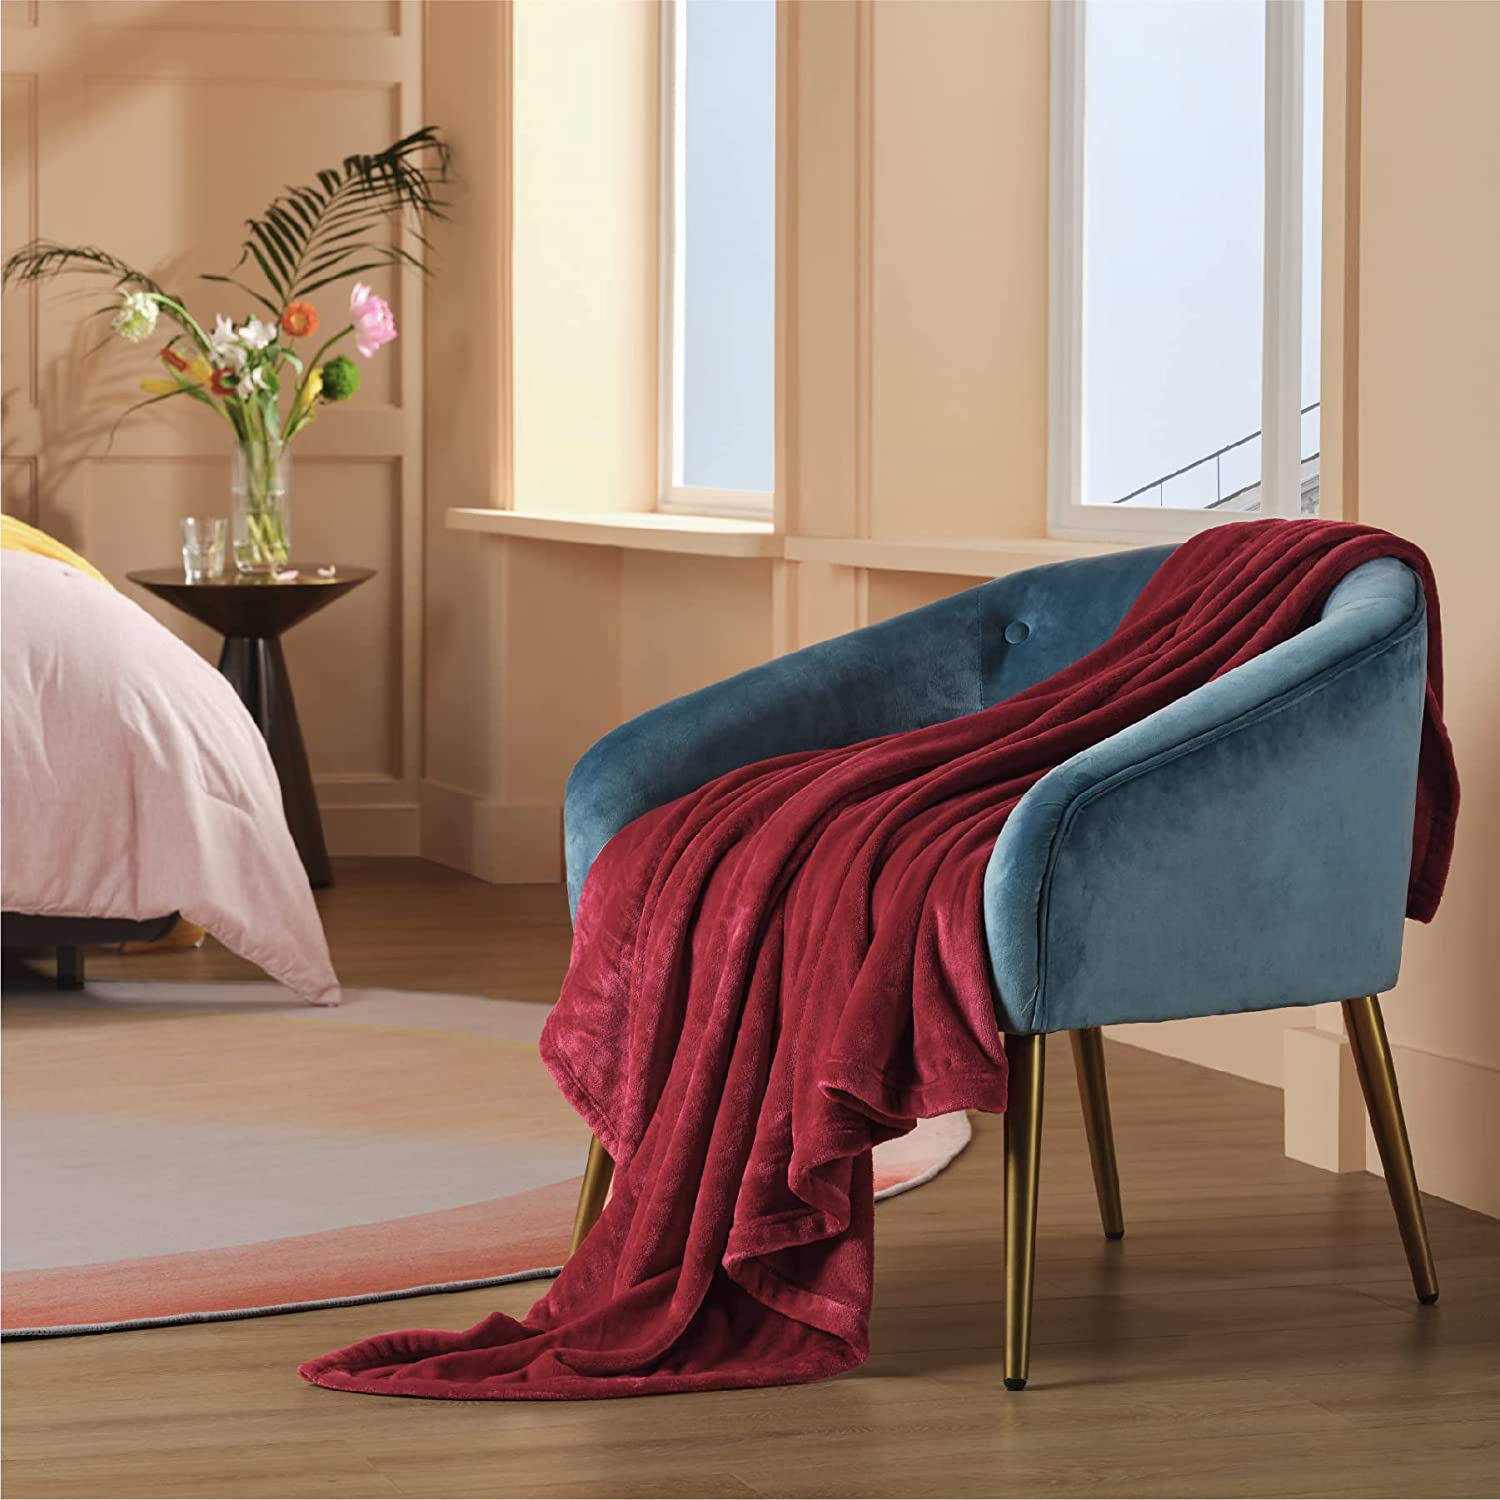 Stylish, Versatile and Cosy - 4 Fabric Weaves for Interior Designers and Decorators in the UK